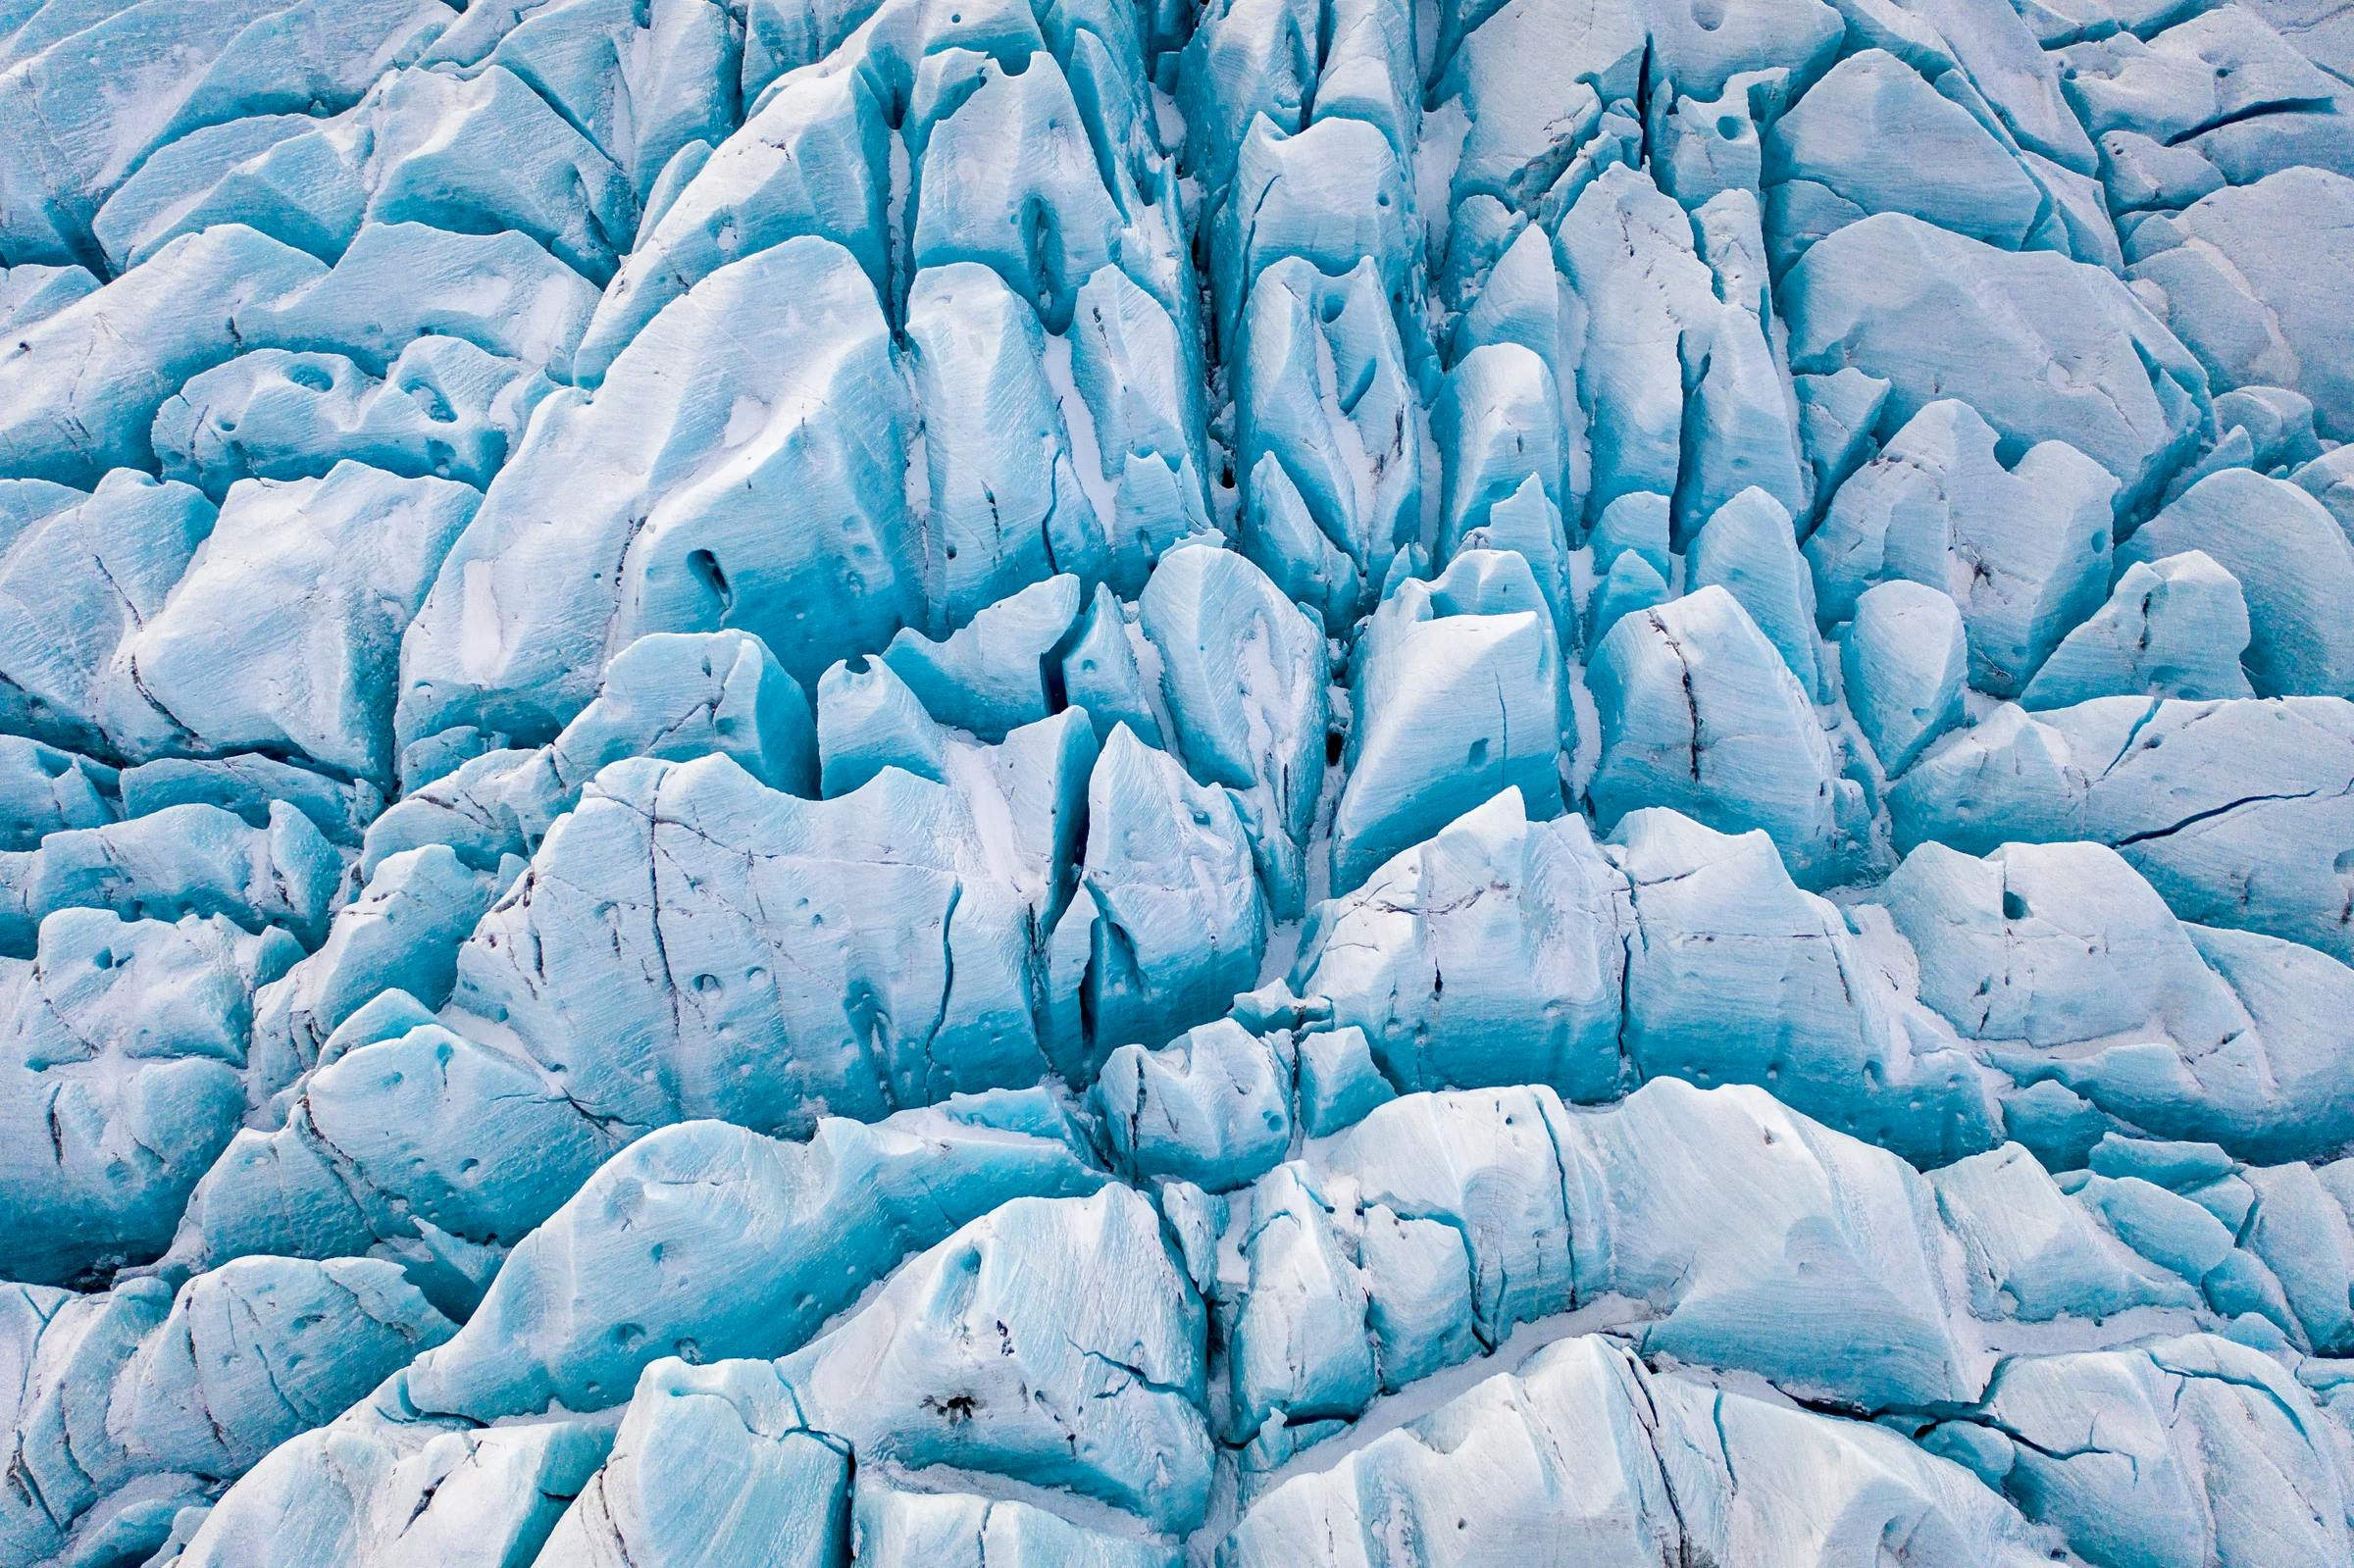 Aerial view of a glacier in Iceland